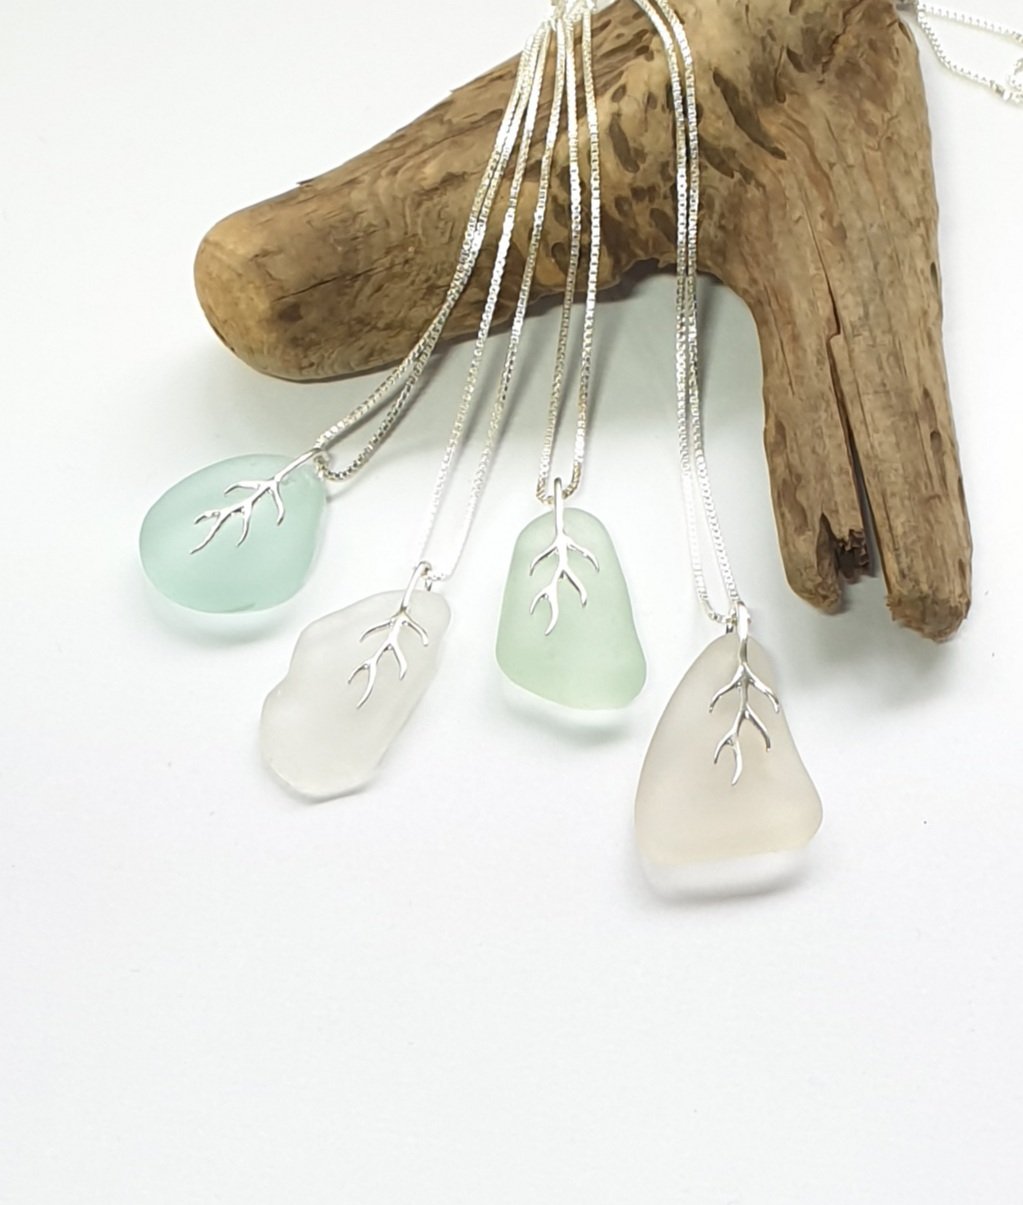 Branching Seaglass Pendant and Sterling Silver Chain